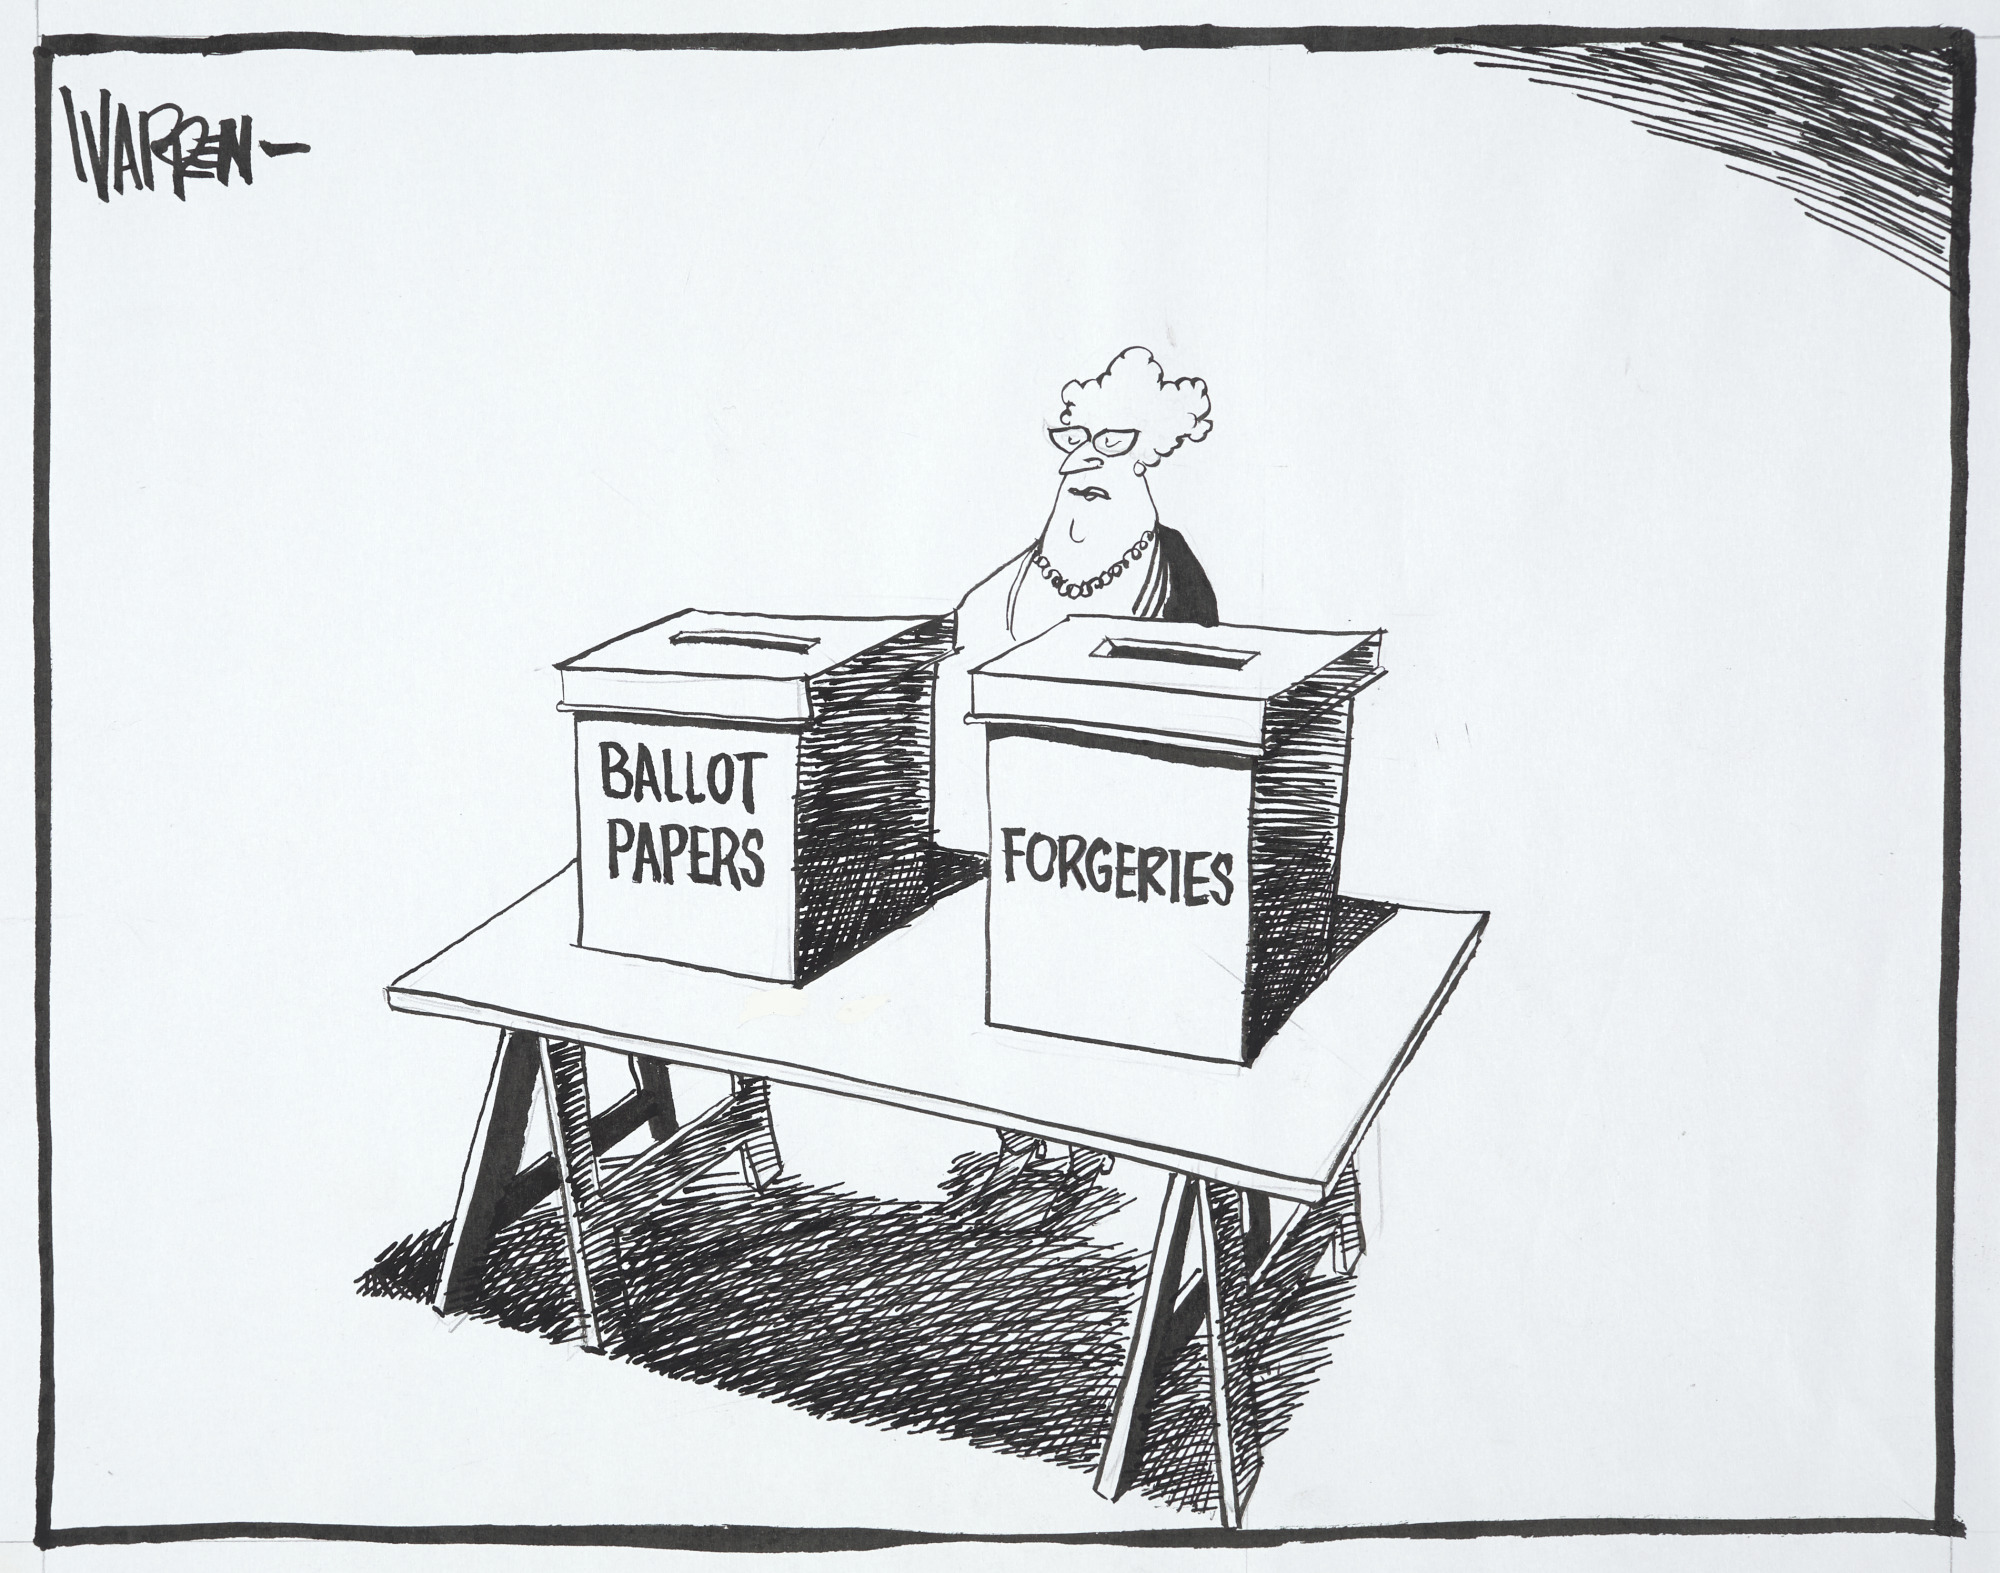 Cartoon titled <i>Ballot Papers</i> by W. Brown. Published in the Daily Telegraph, 1996.